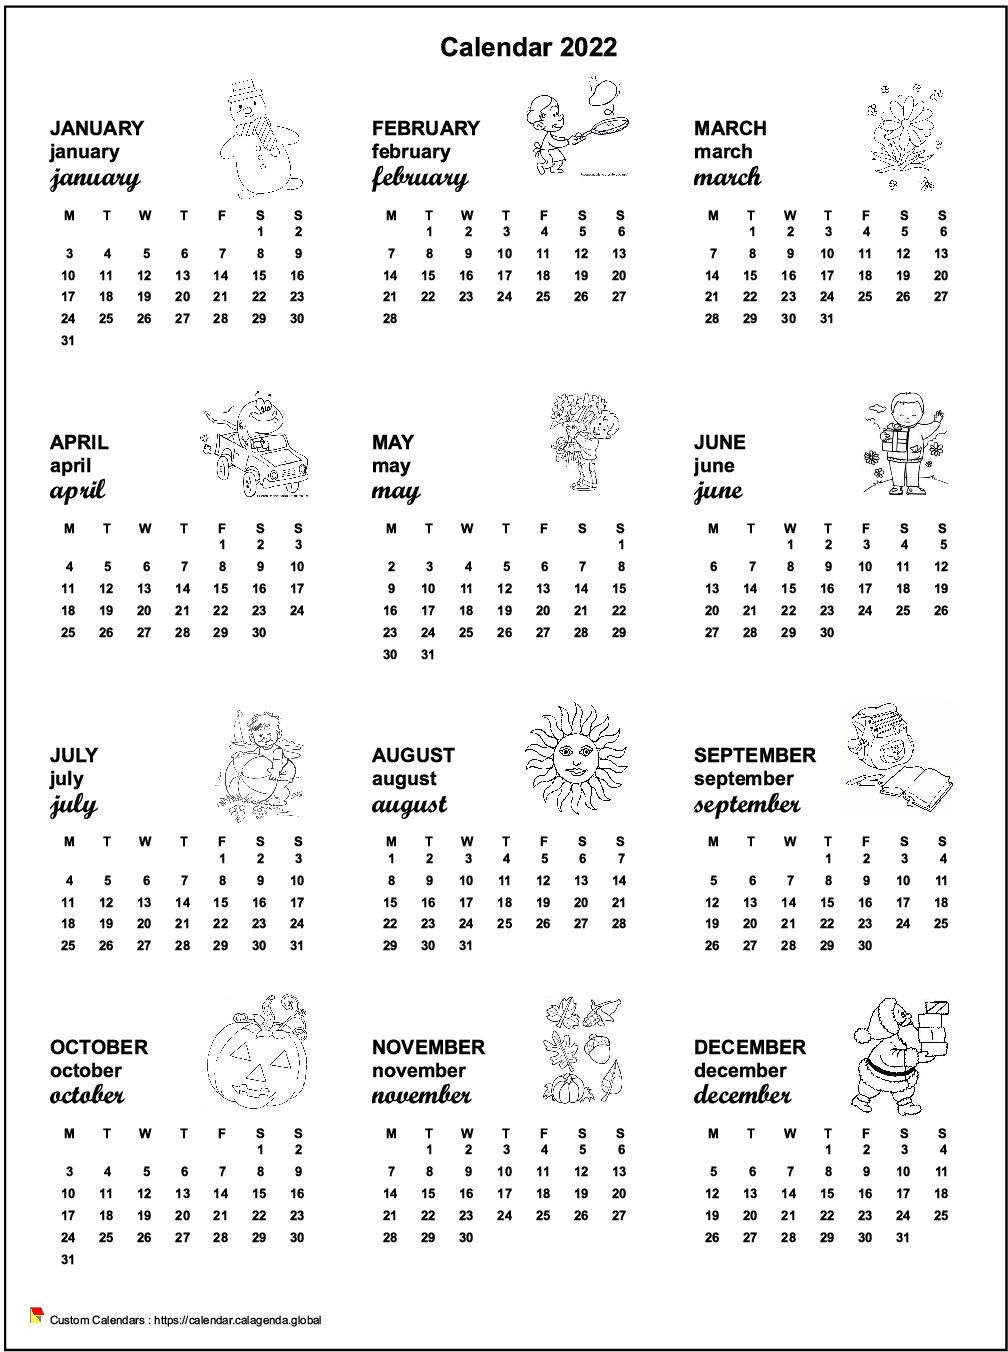 Calendar 2022 annual maternal and primary school